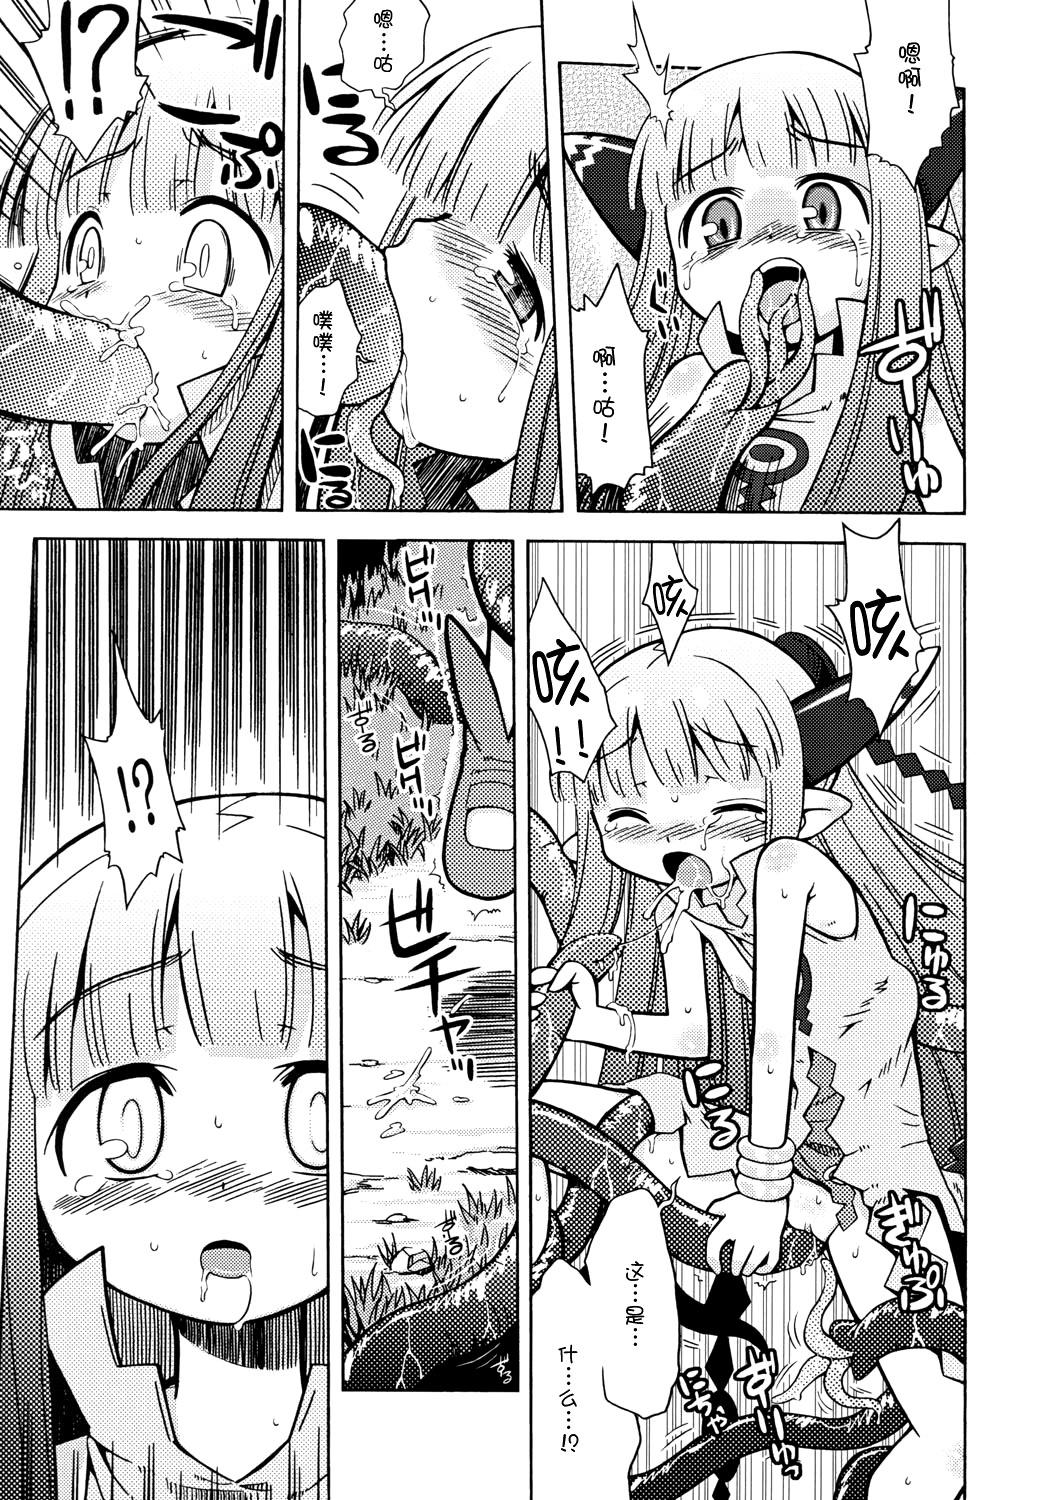 Ass Milreaf no Anone - Summon night Virgin - Page 9